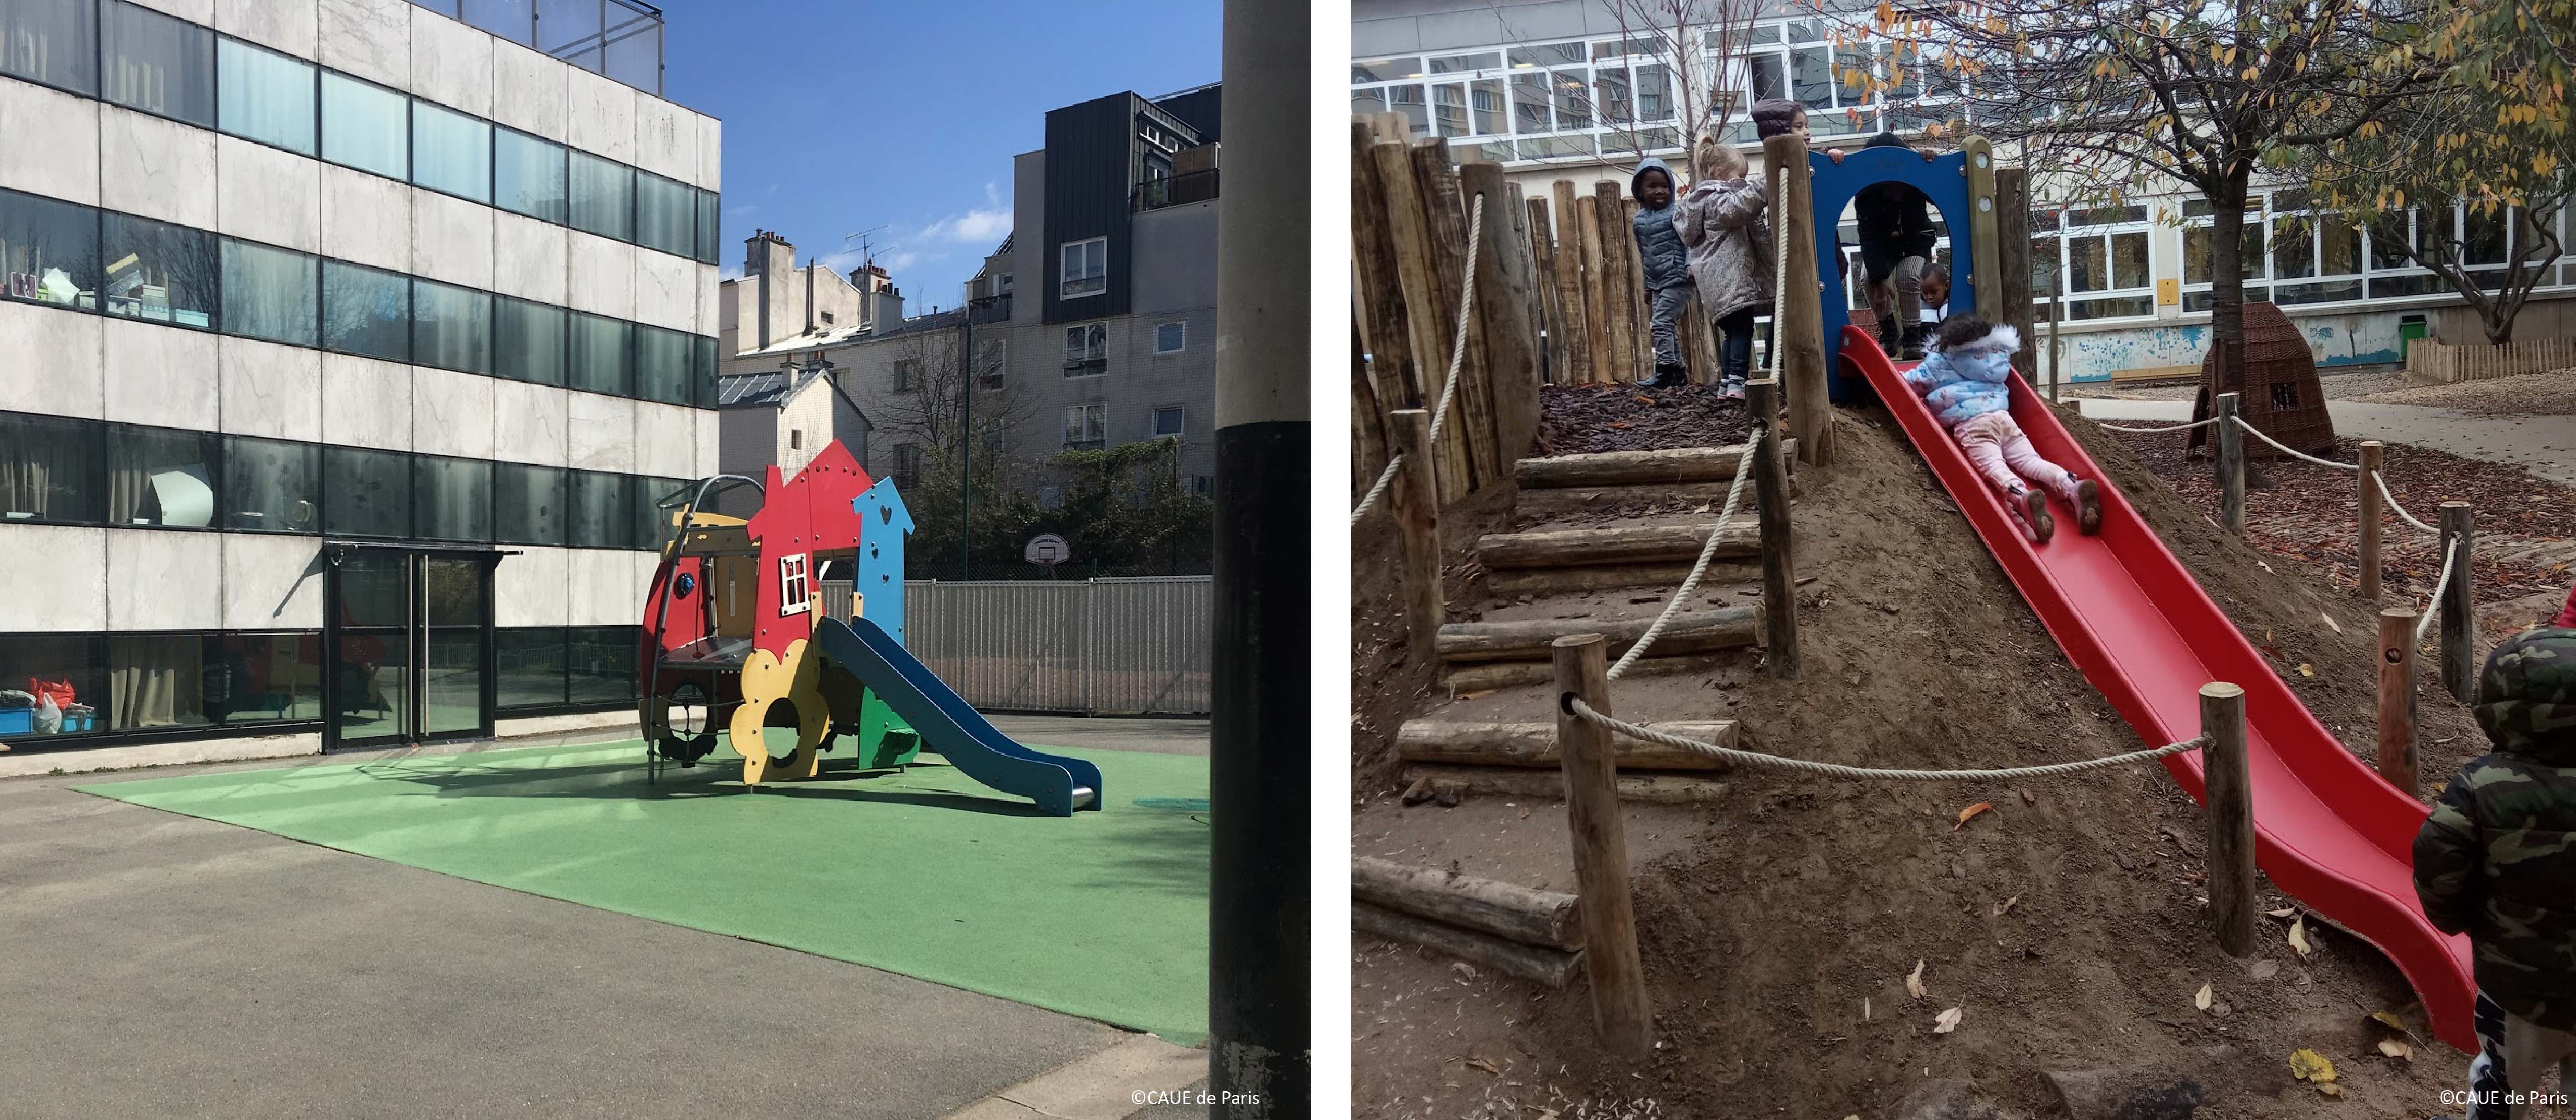 The schoolyard's playground area before and after the OASIS tranformation